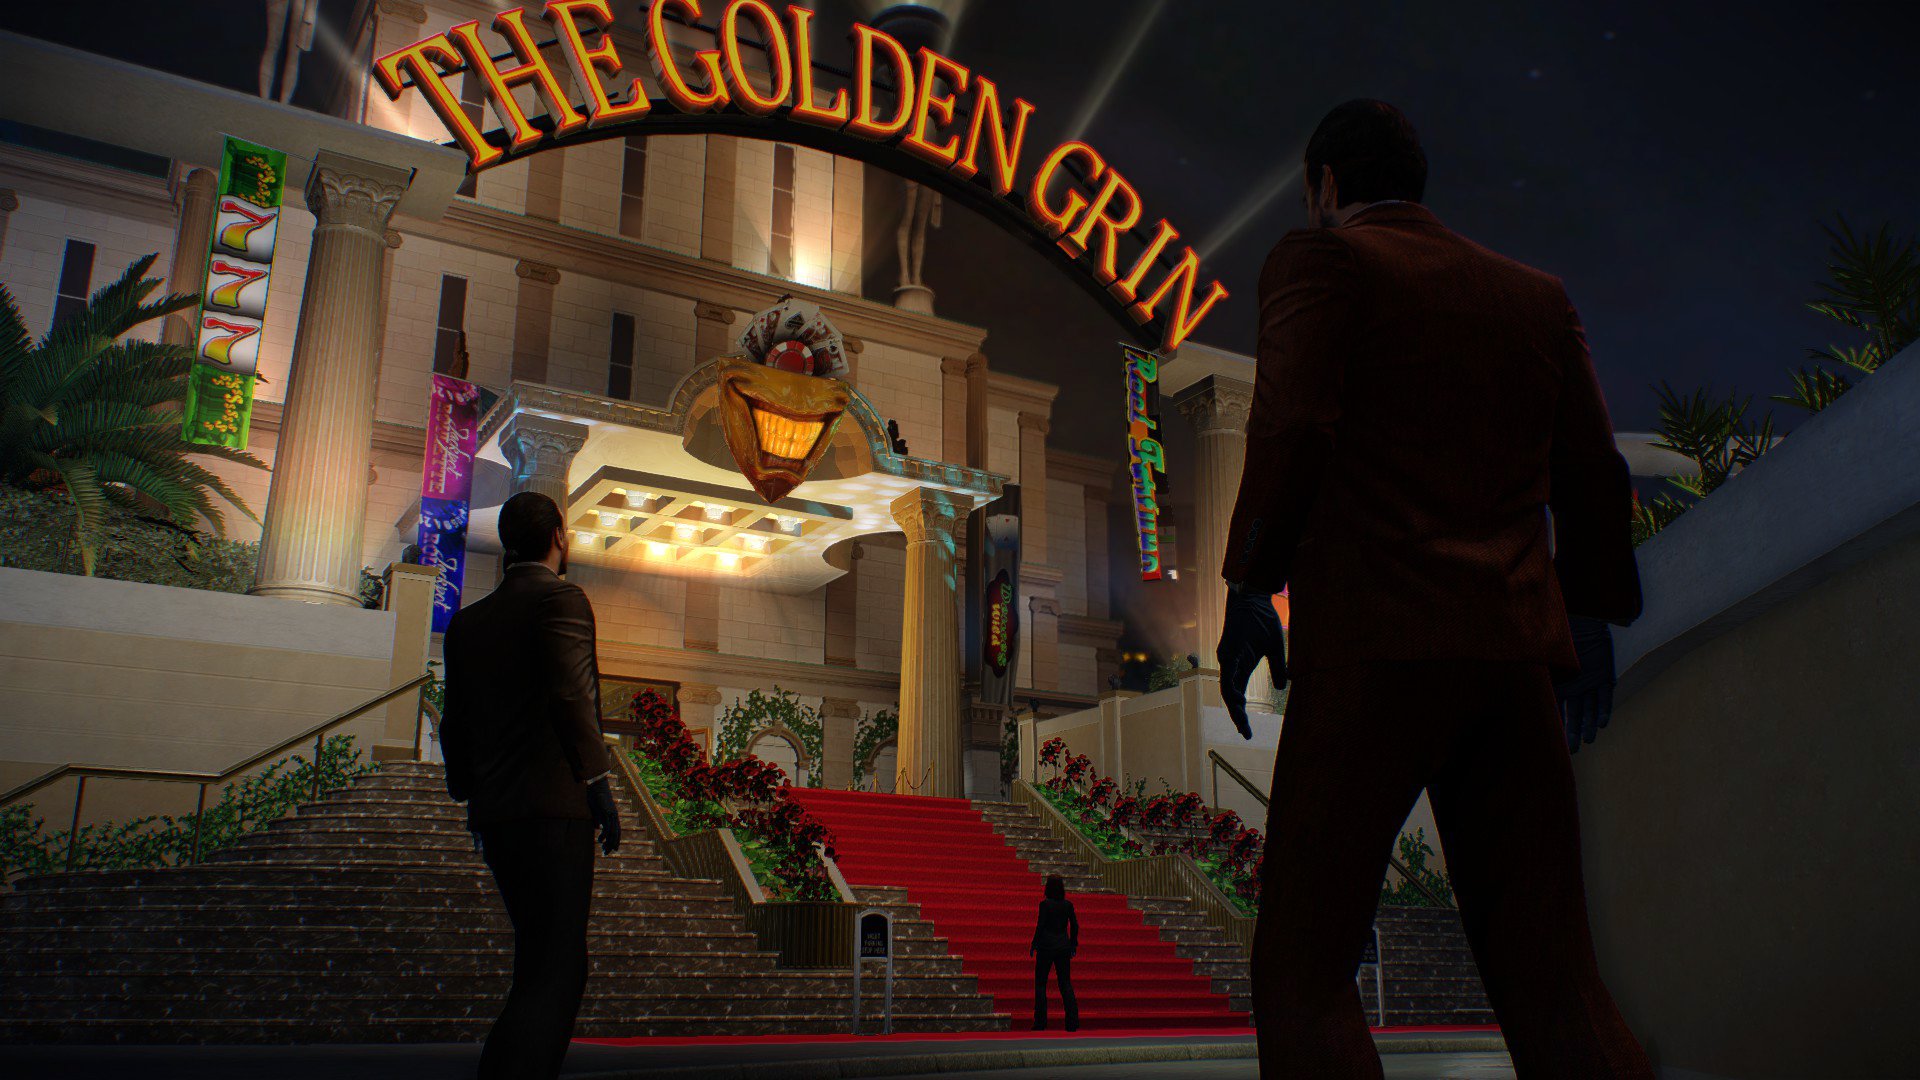 Golden green casino payday 2 фото 2